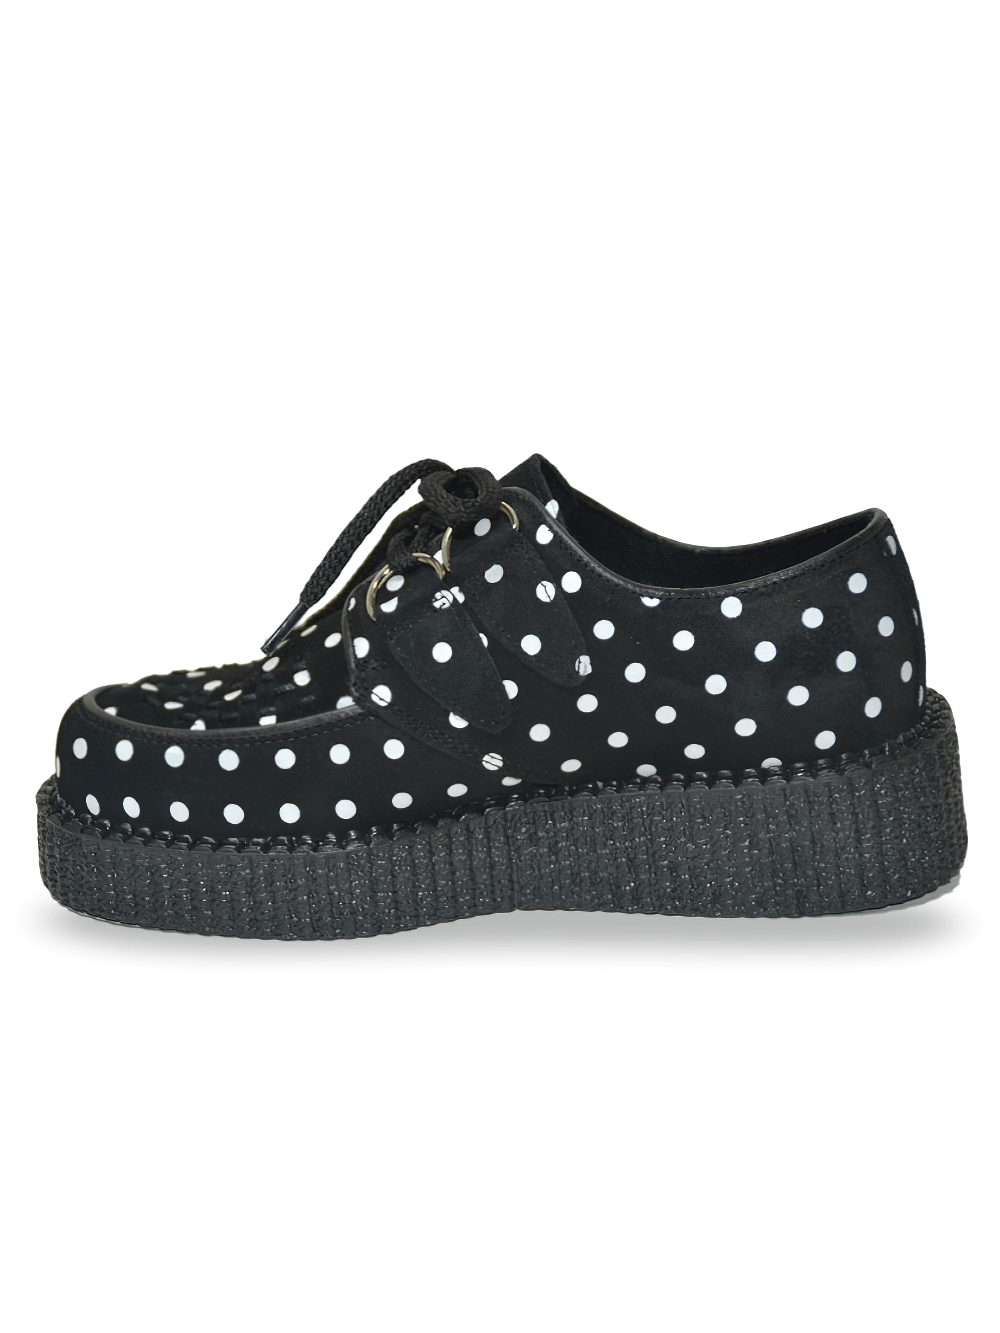 Stylish Polka Dot Black Suede Creepers with Lace-Up